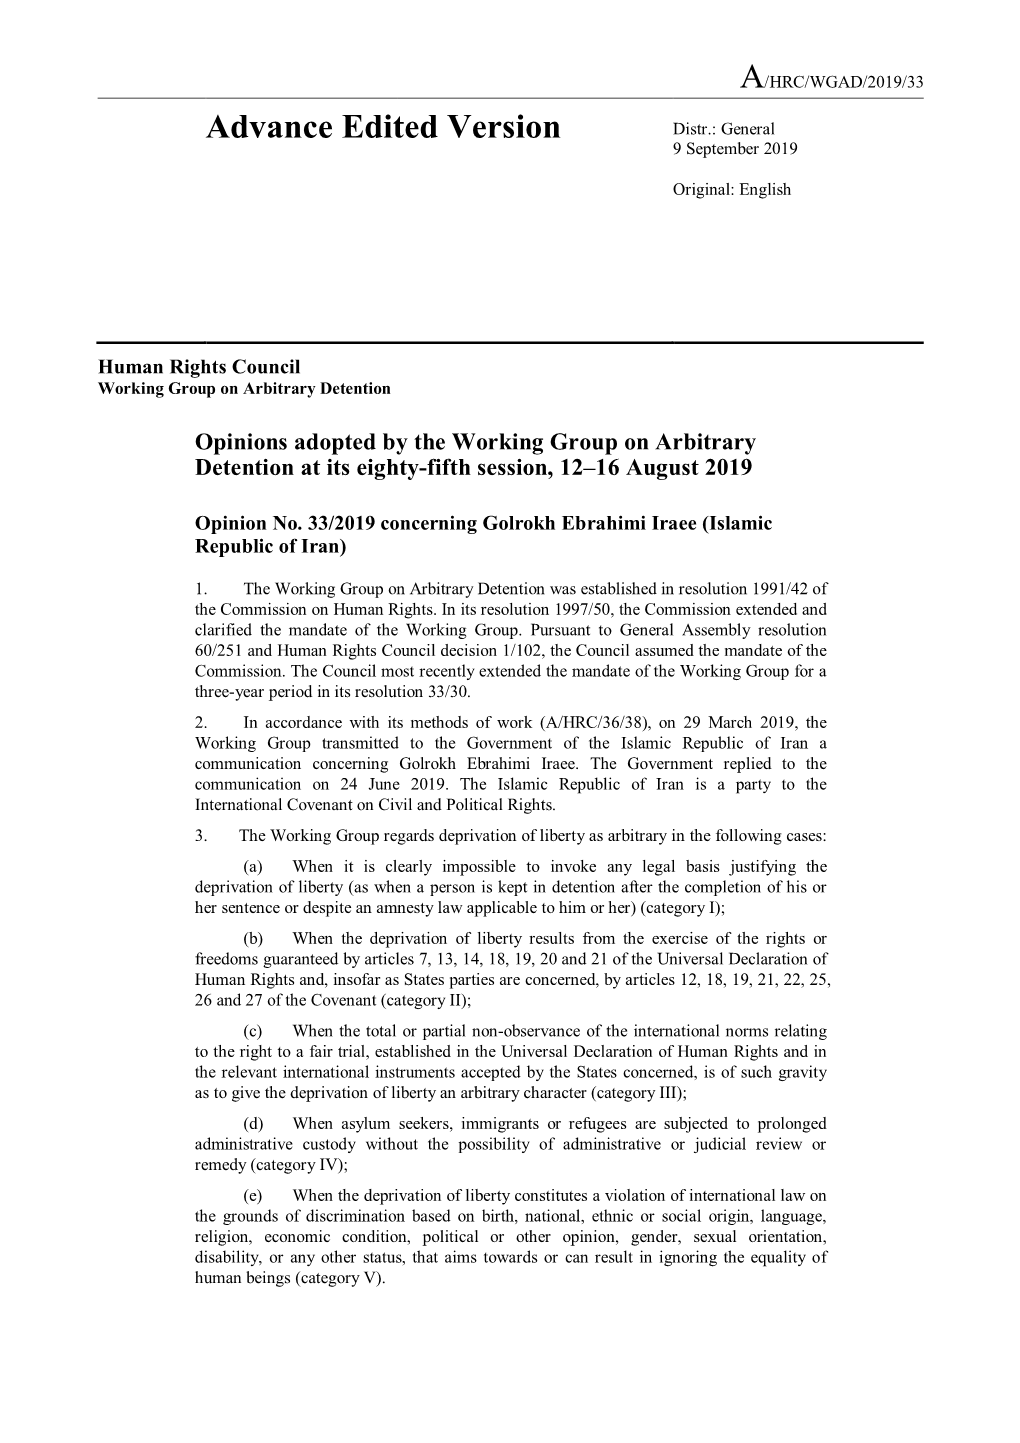 Opinions Adopted by the Working Group on Arbitrary Detention at Its Eighty-Fifth Session, 12–16 August 2019